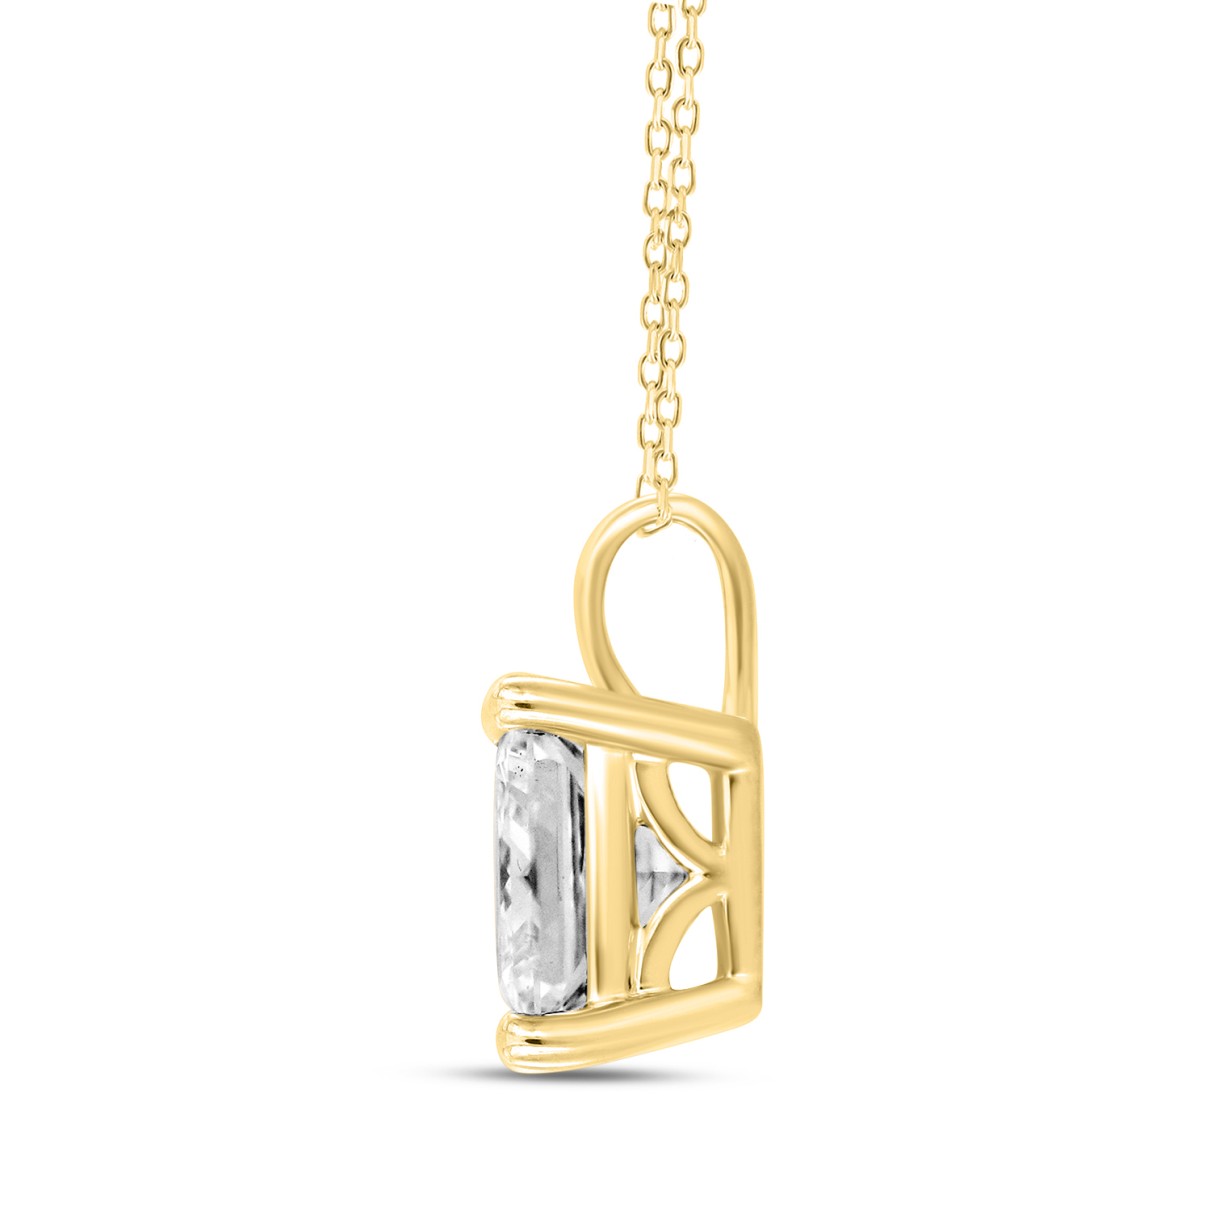 LADIES SOLITAIRE PENDANT WITH CHAIN 1 1/2CT PRINCESS DIAMOND 14K YELLOW GOLD